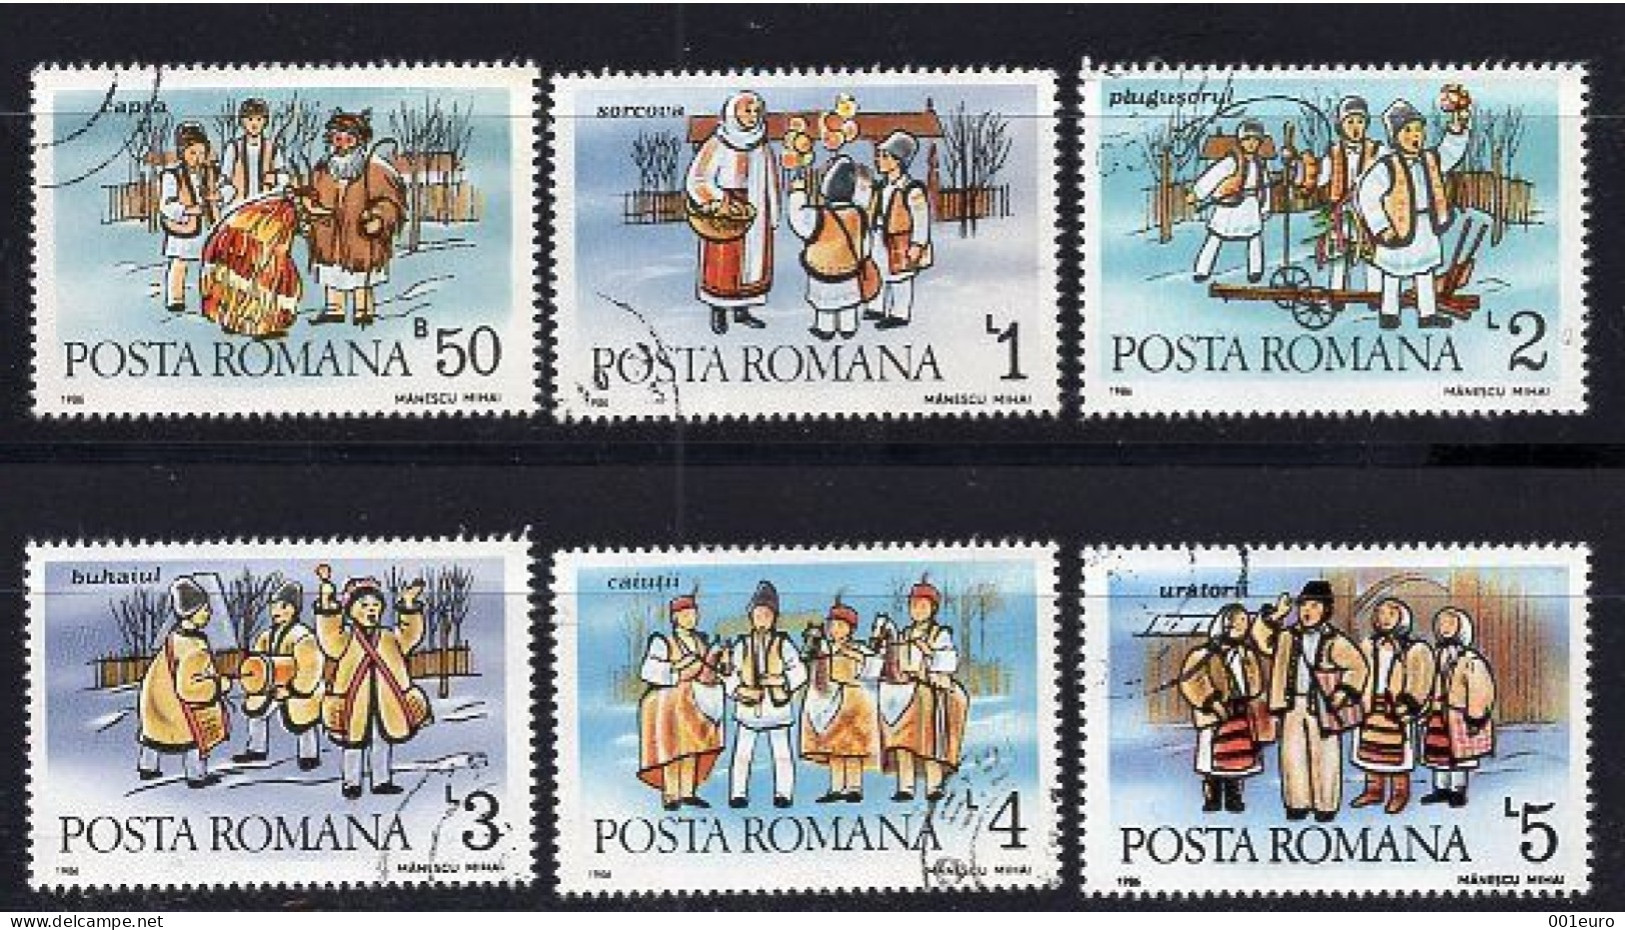 ROMANIA 1986: WINTER CARROLS, Used 6 Stamps Set - Registered Shipping! - Gebraucht